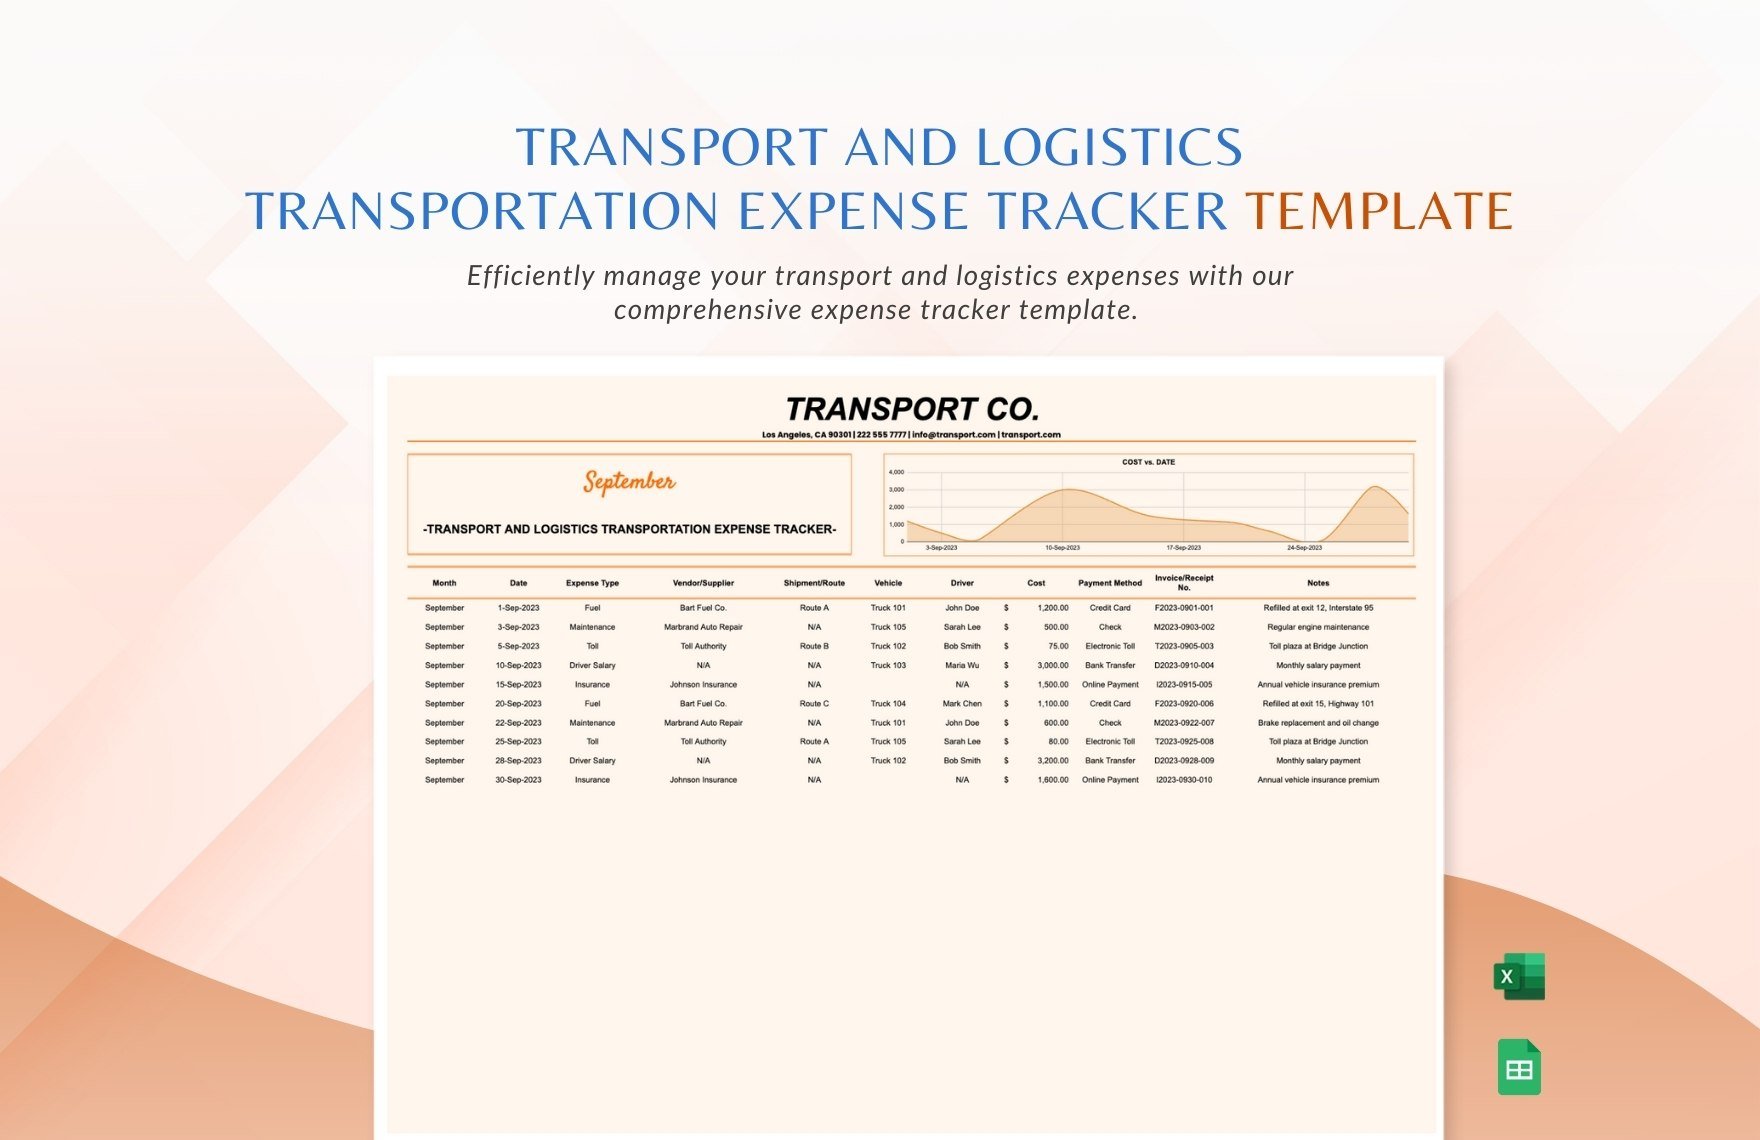 Free Transport and Logistics Transportation Expense Tracker Template in Excel, Google Sheets